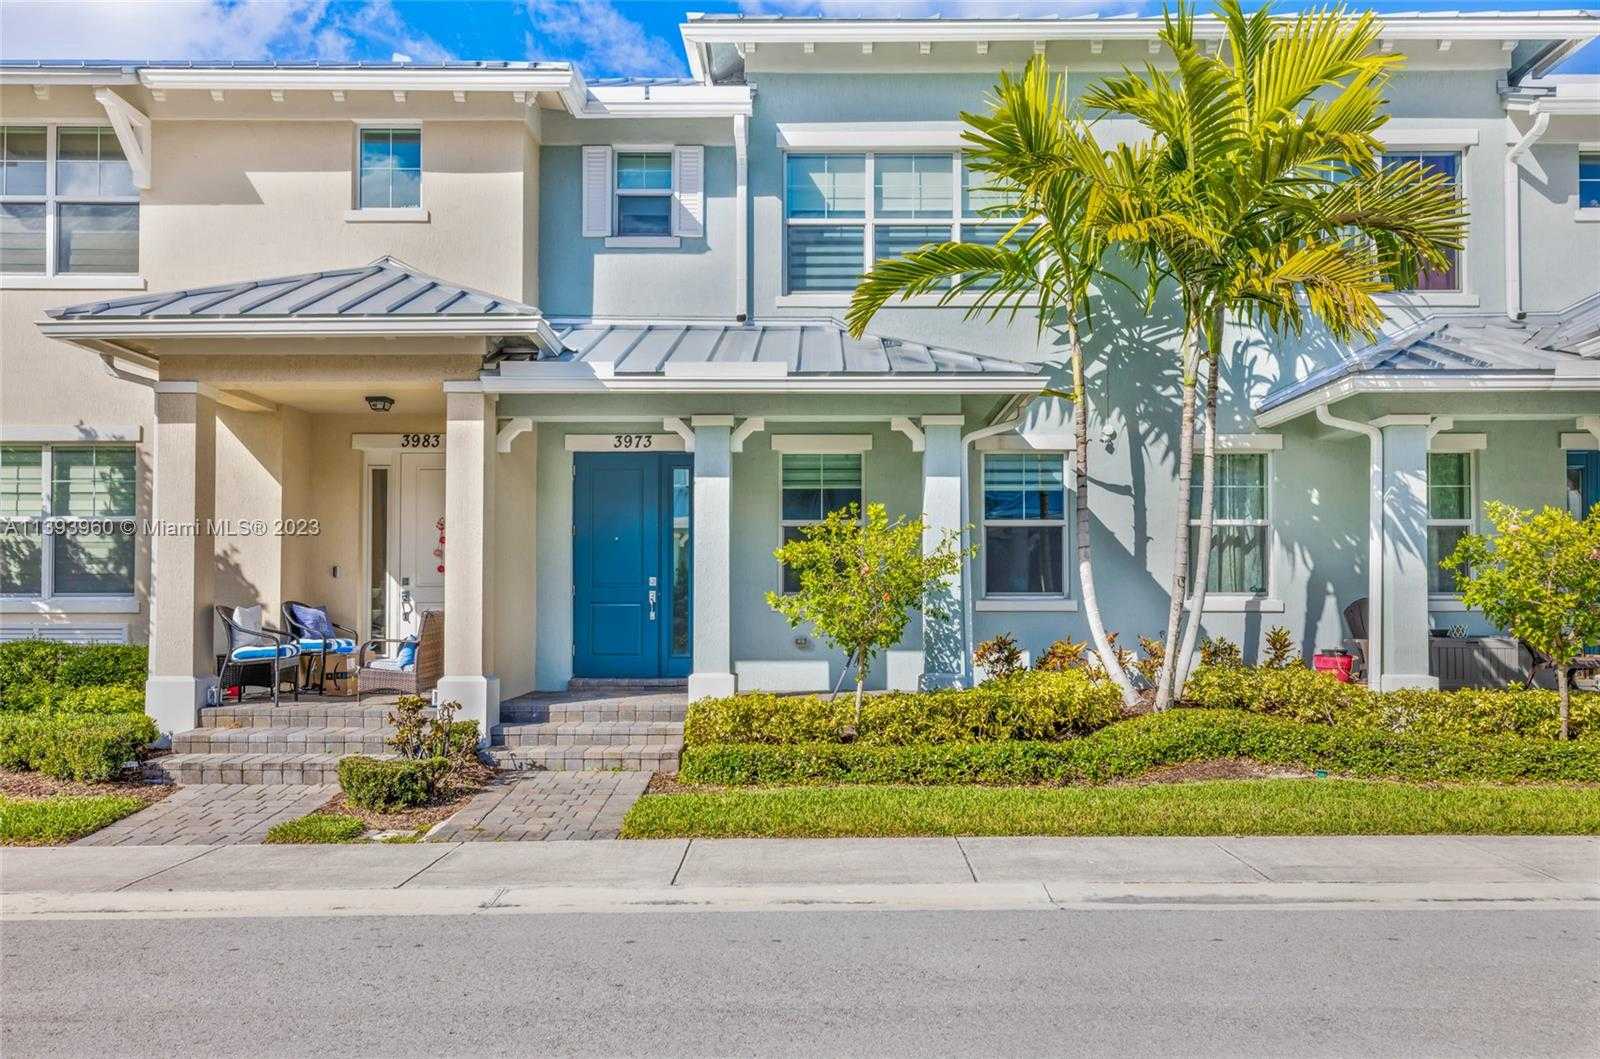 View Hollywood, FL 33021 townhome